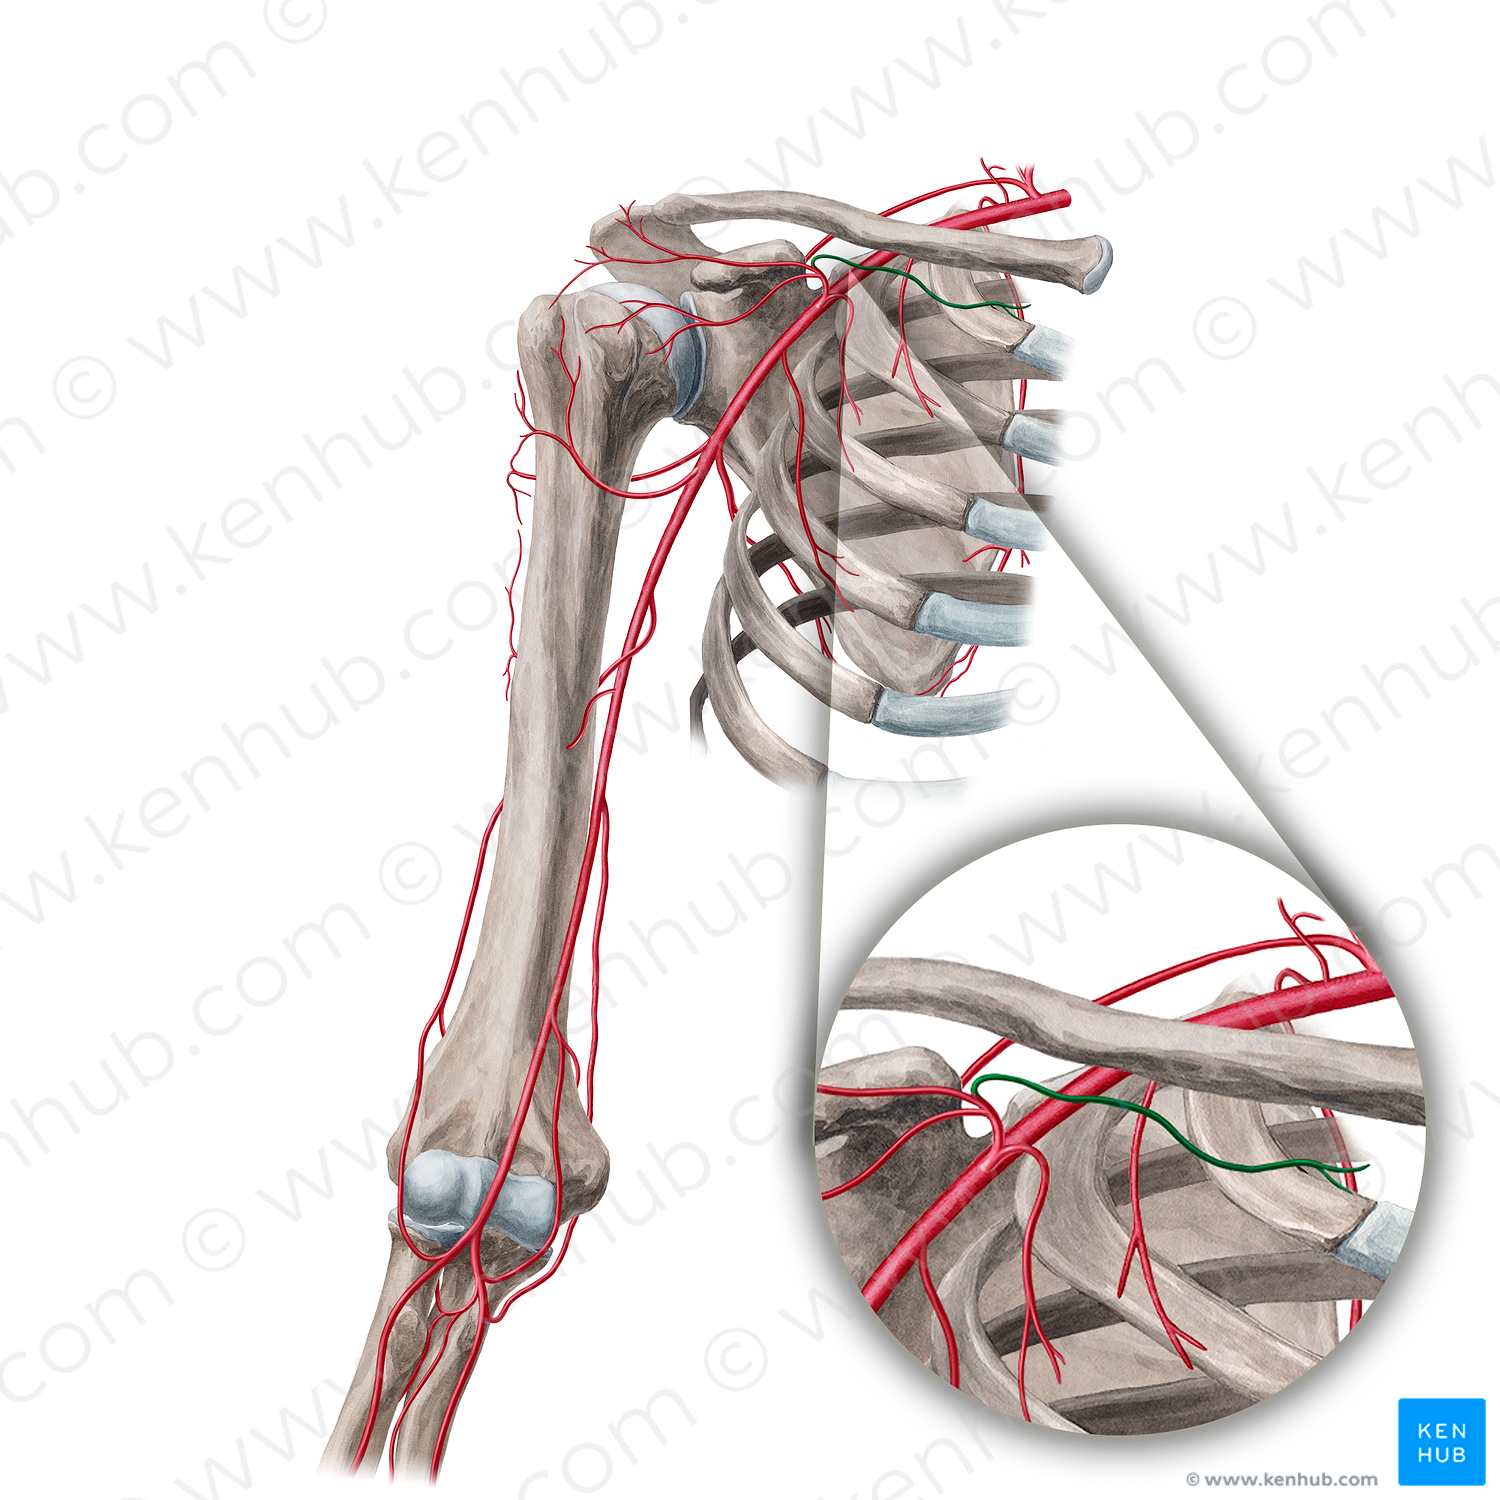 Clavicular branch of thoracoacromial artery (#18924)